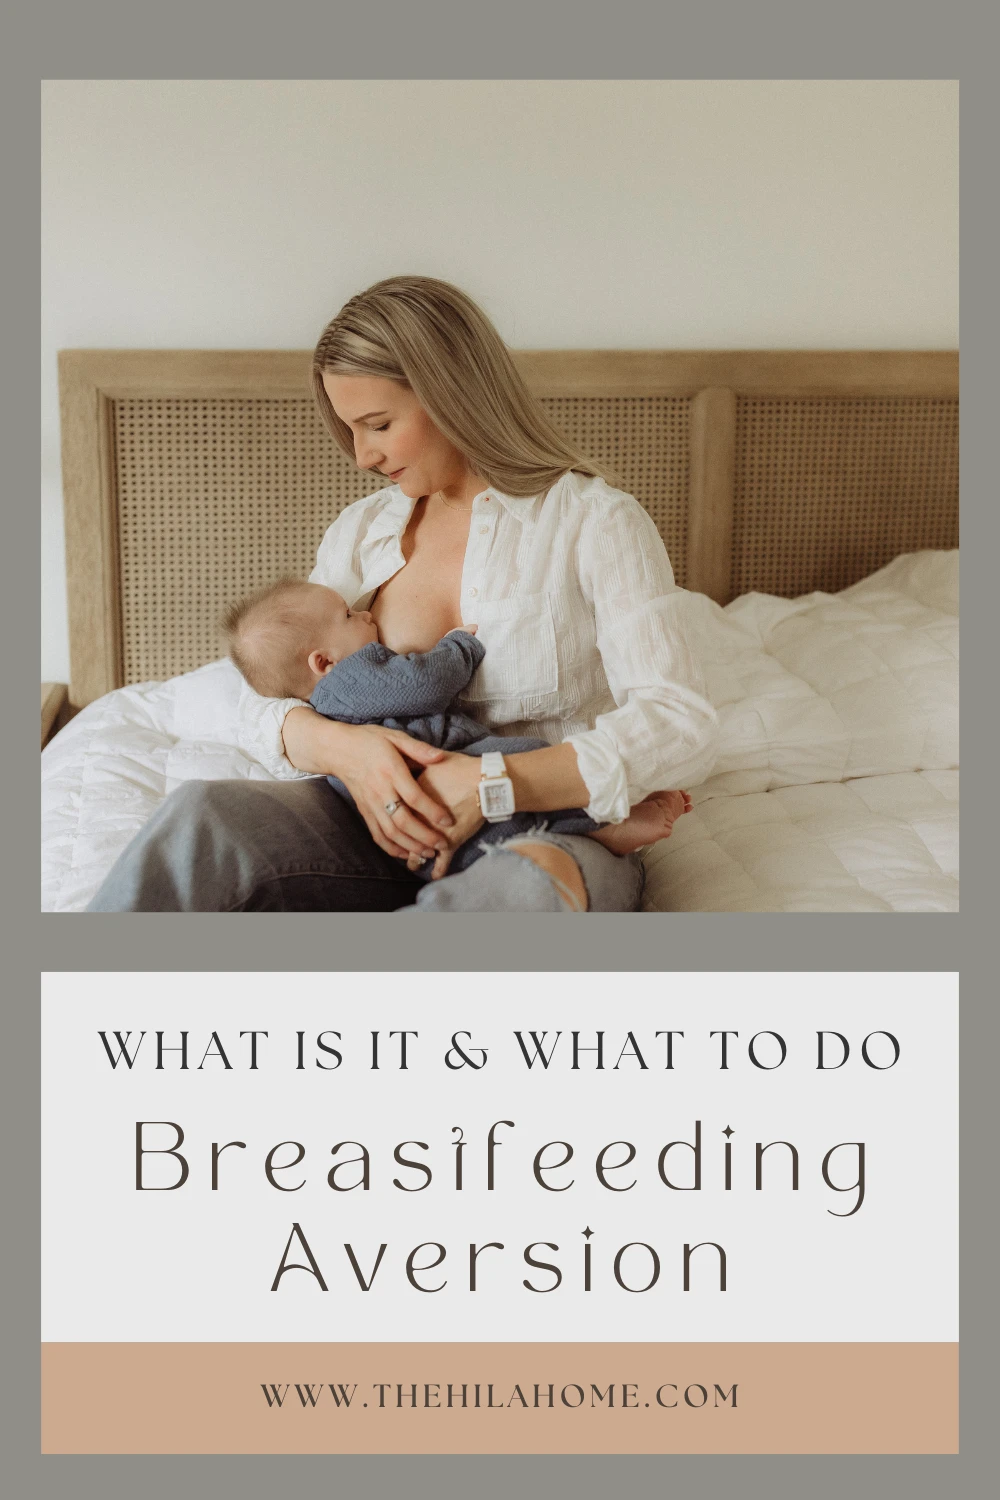 What to Do if You Have Breastfeeding Aversion